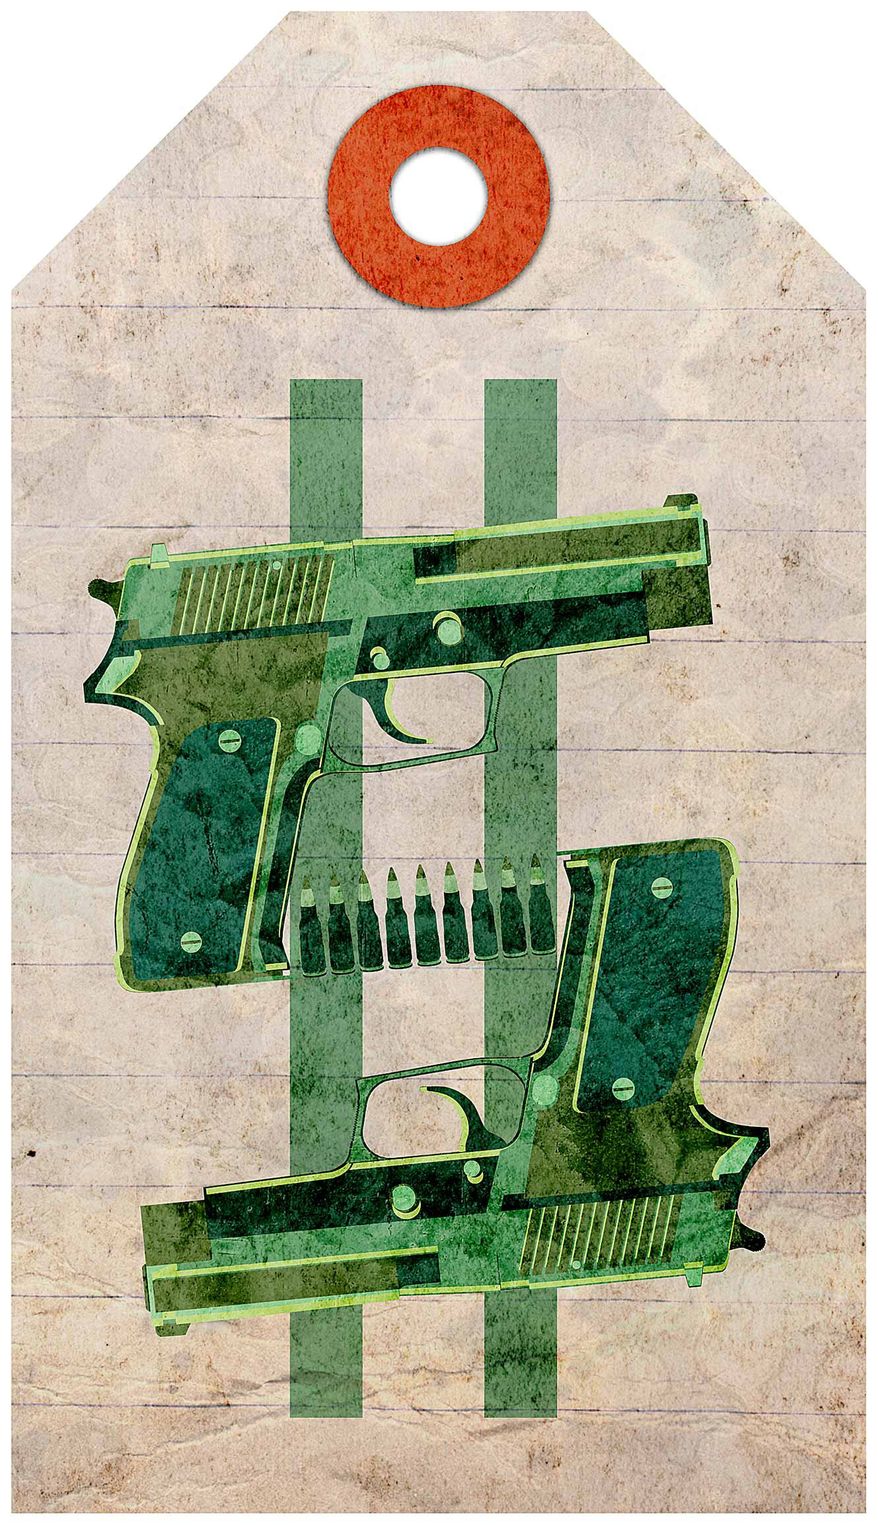 The Price of Guns Illustration by Greg Groesch/The Washington Times